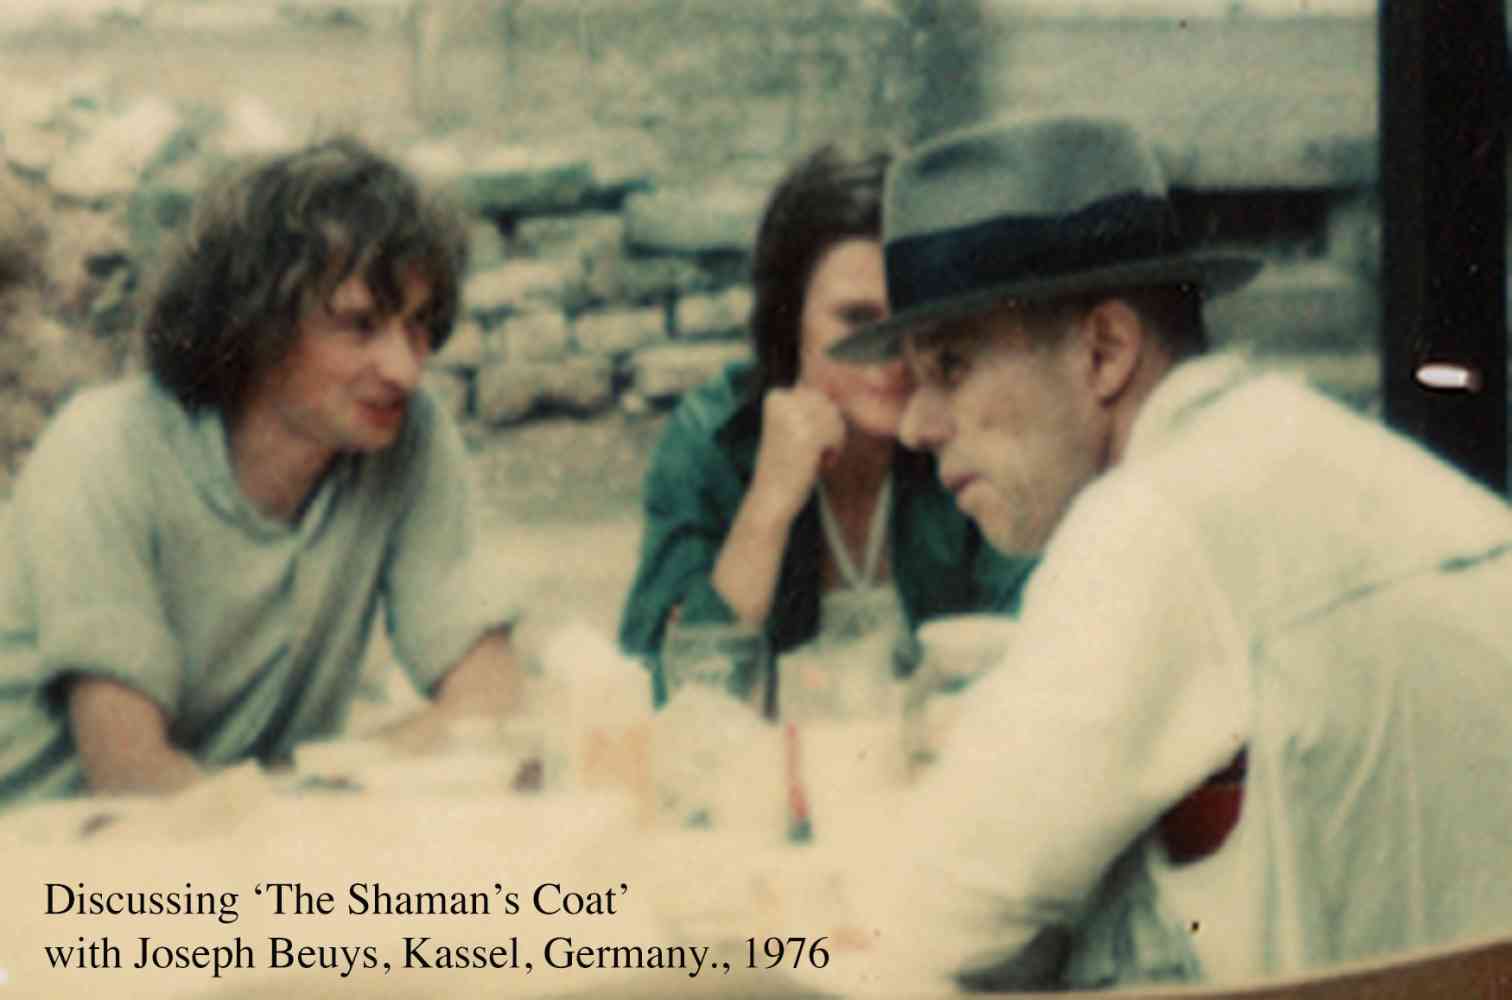 Historic discussion with Joseph Beuys  during exhibition, Kasel Germany - During my part of the Documenta exhibition collaborated with Joseph Beuys on a new work 'The Shaman's Coat'